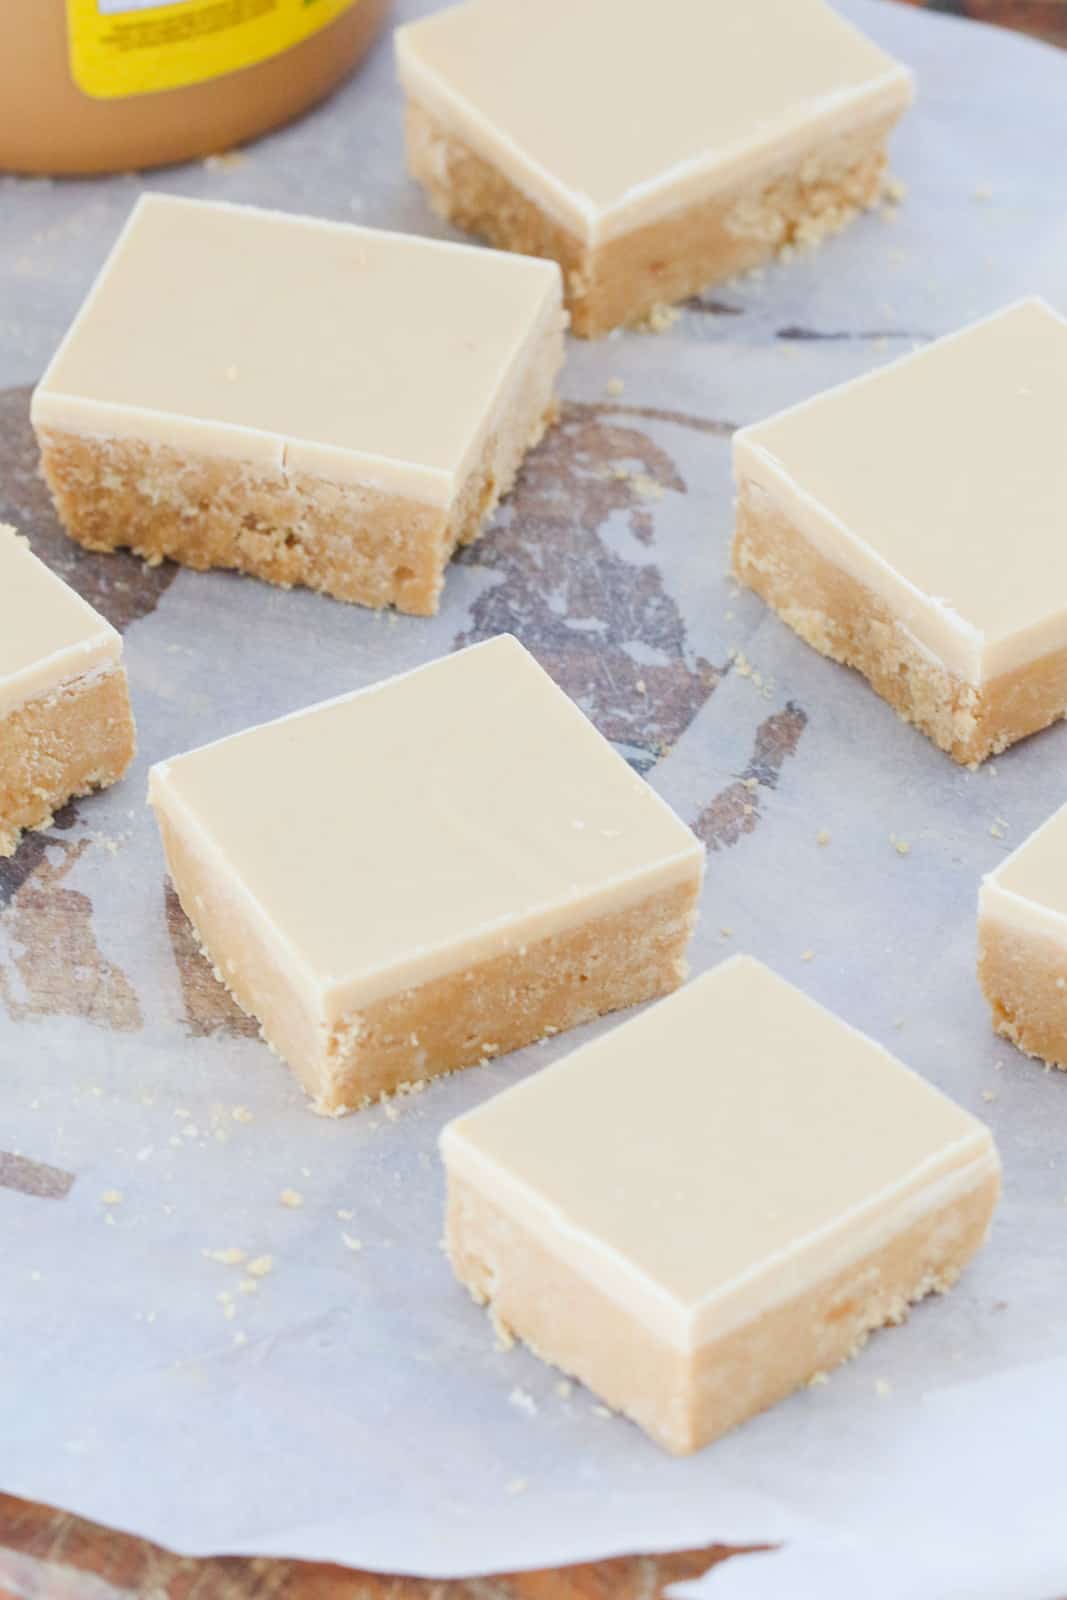 A white chocolate and peanut slice cut into squares on a chopping board.